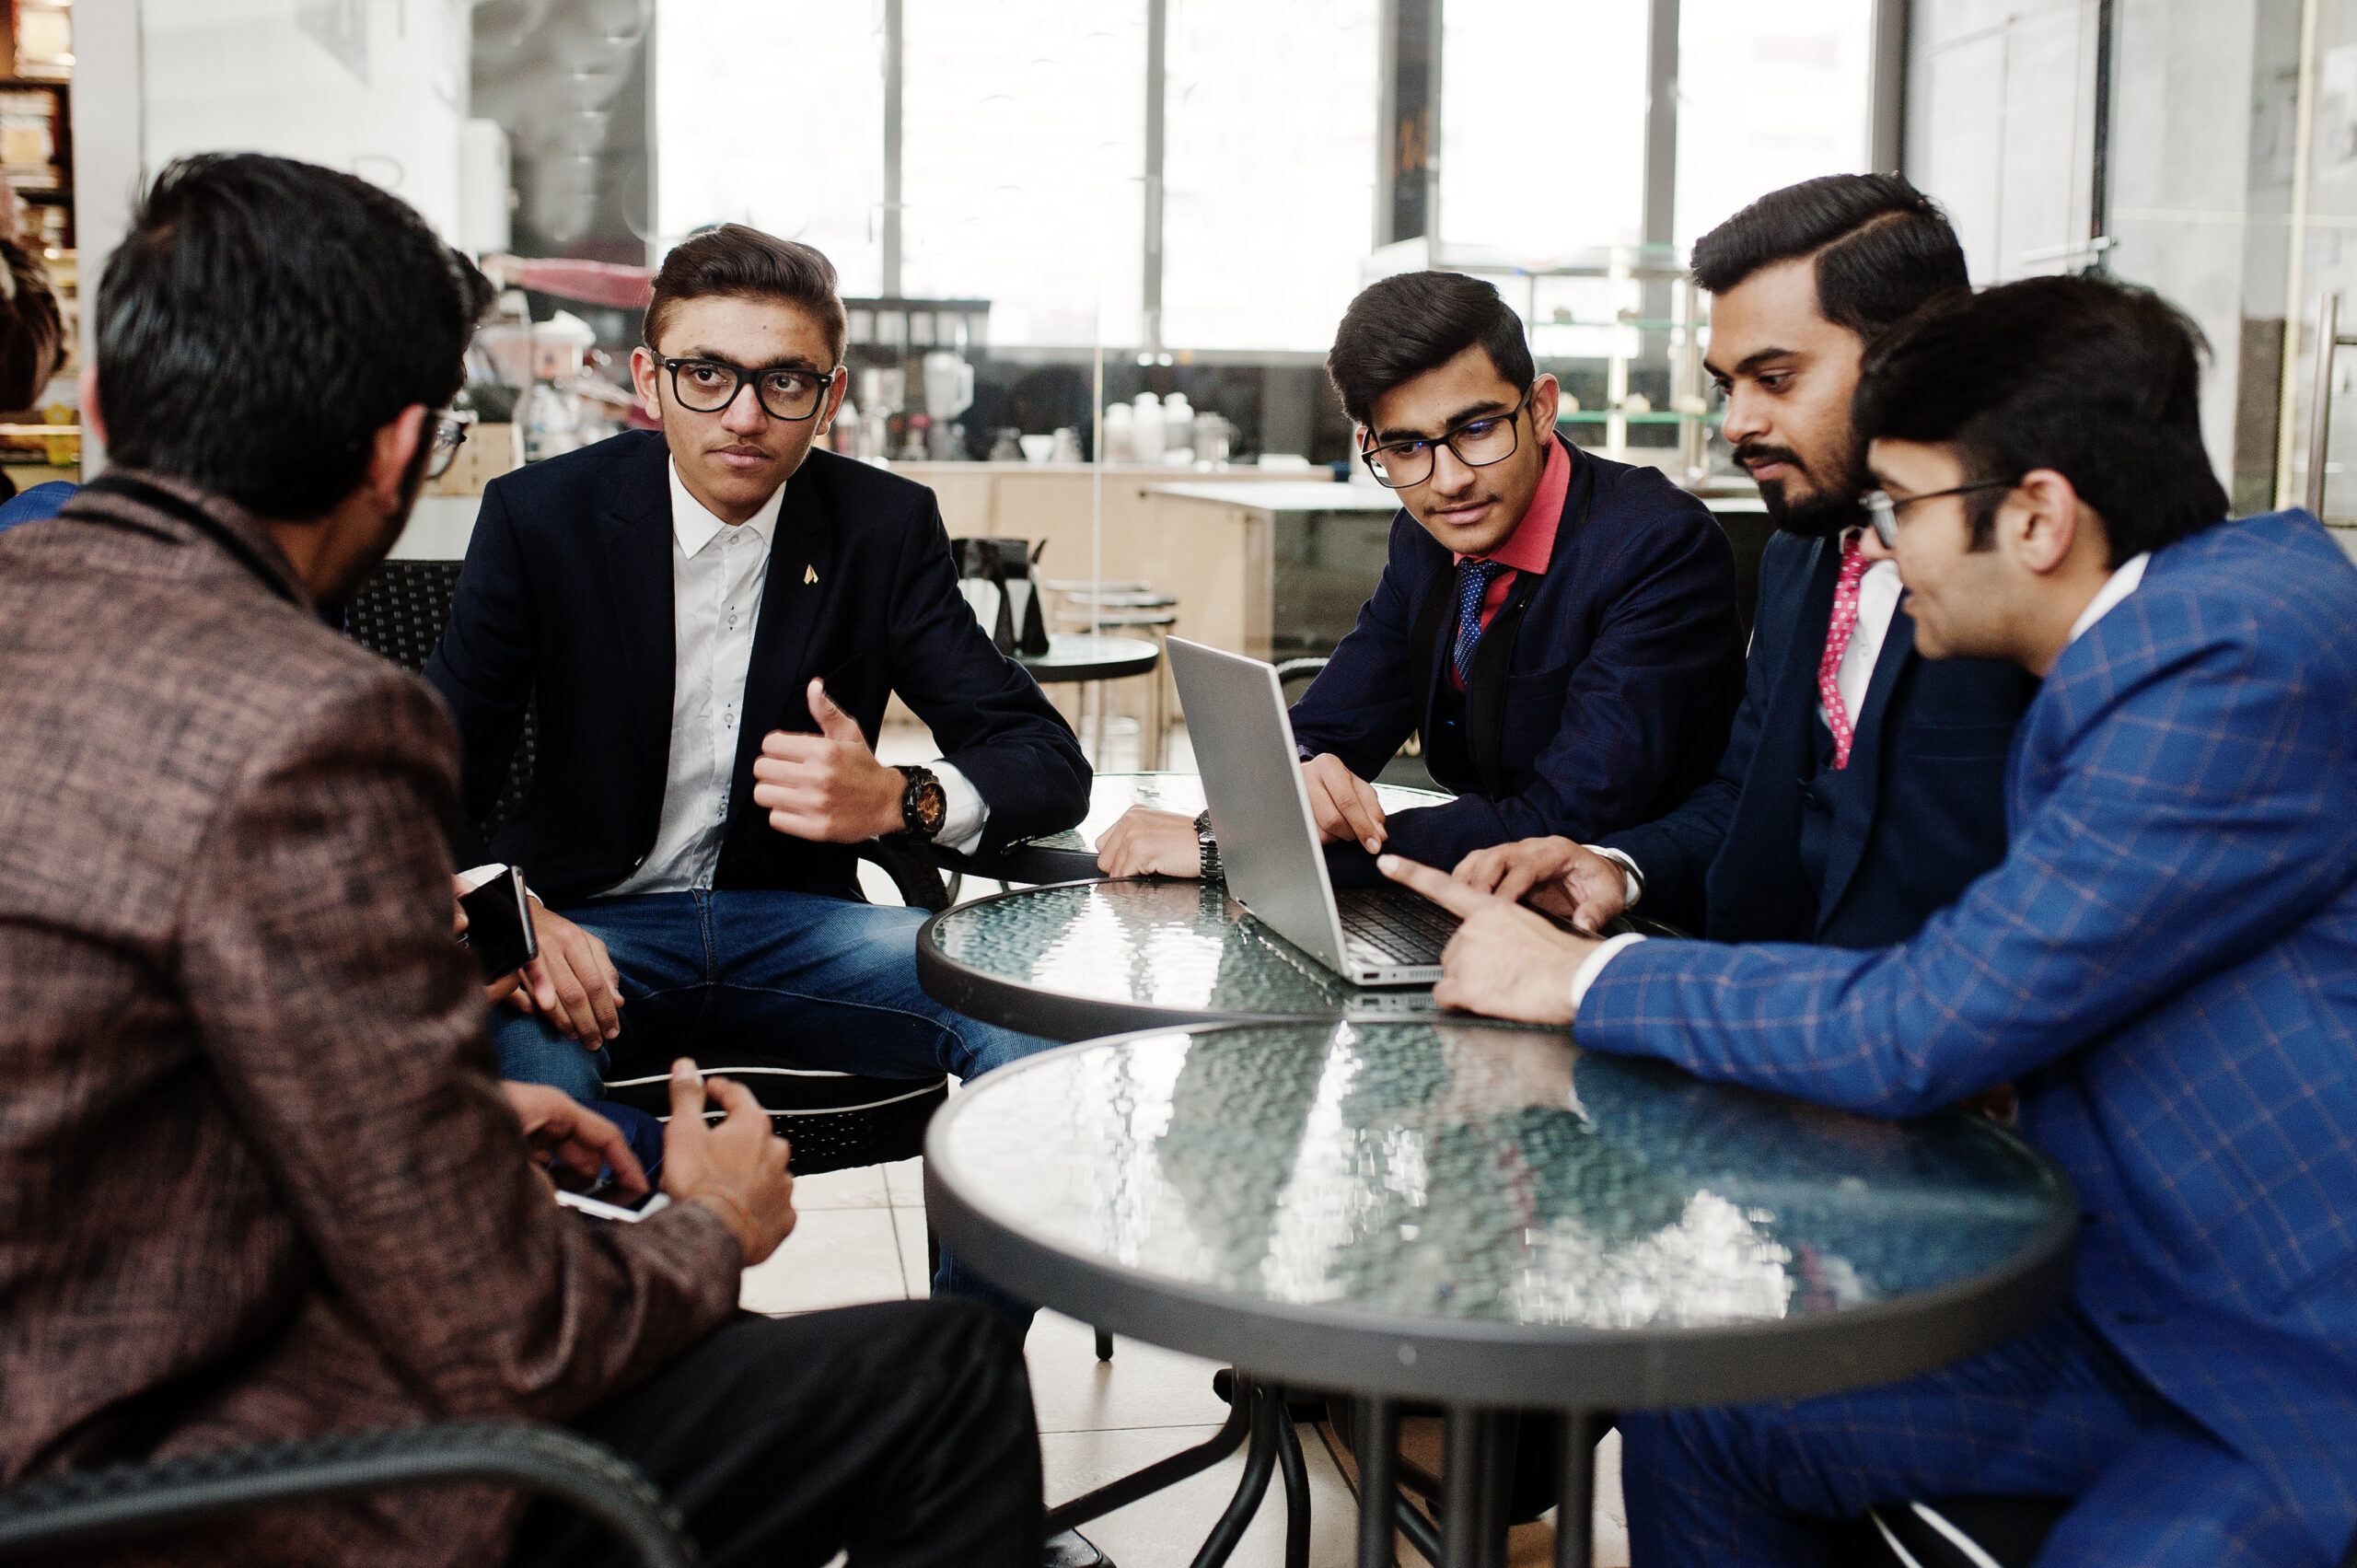 Group of five indian business man in suits sitting at office on cafe and looking at laptop.